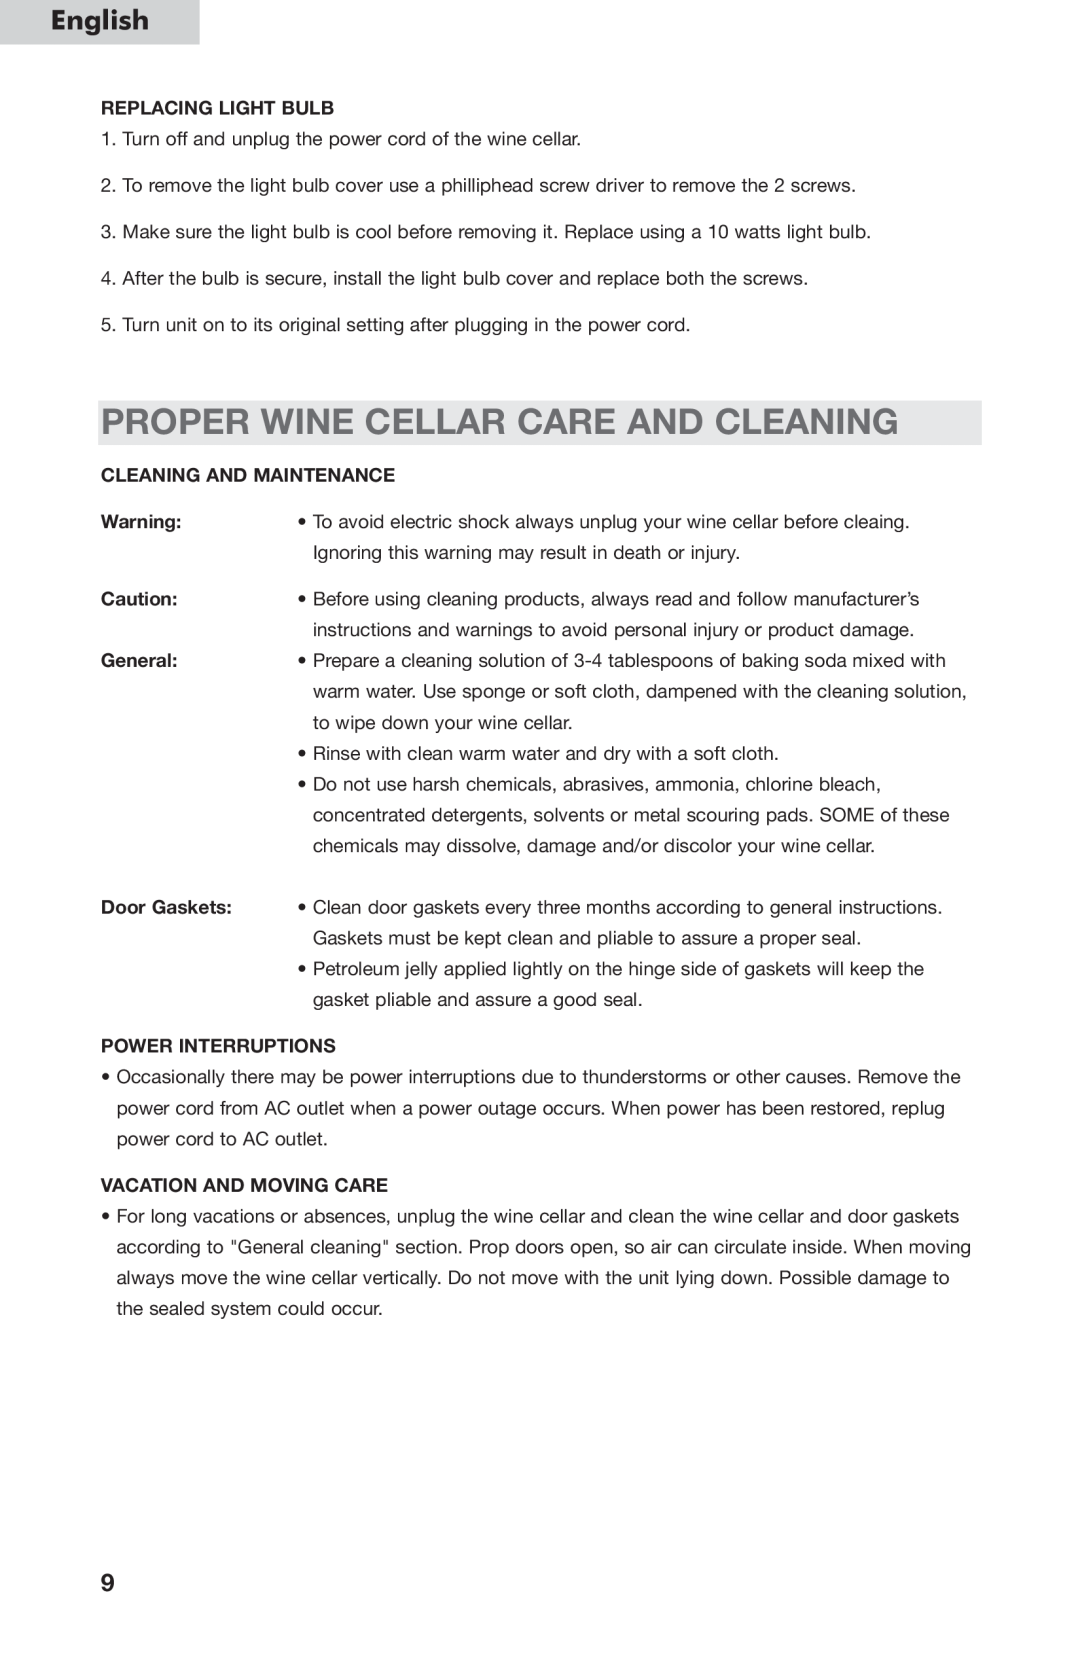 Haier HVC24B Proper Wine Cellar Care And Cleaning, Replacing Light Bulb, Cleaning And Maintenance, Power Interruptions 